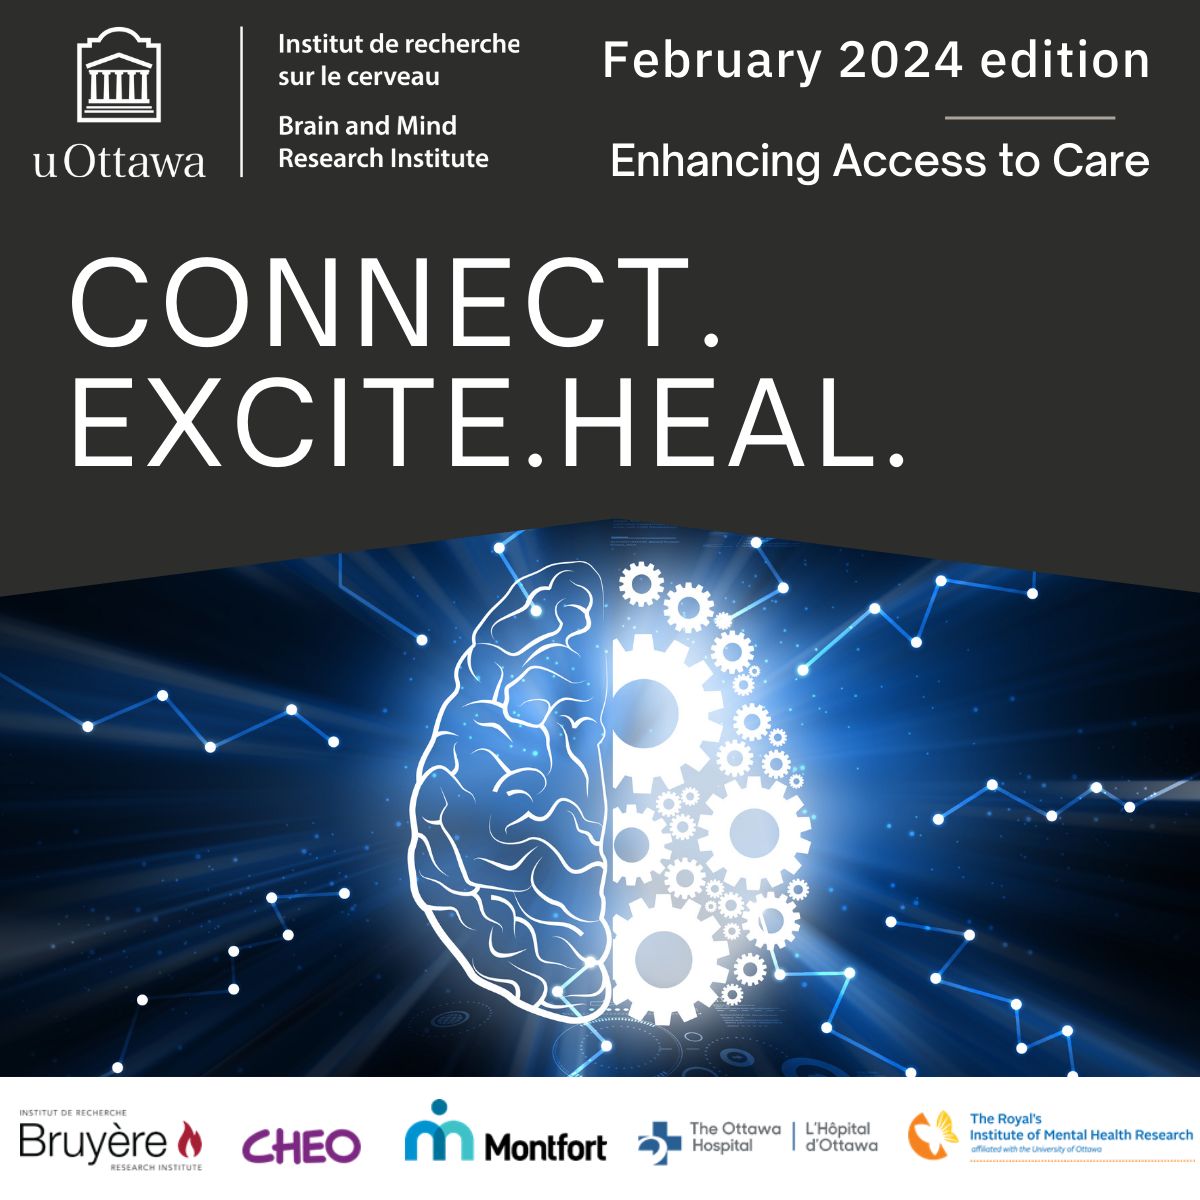 Welcome to the February edition of our Connect.Excite.Heal. series! This month we will share how the uOBMRI is enhancing access to care and resources for people living with neurological conditions and their care partners. Follow to learn more! #ConnectExciteHeal